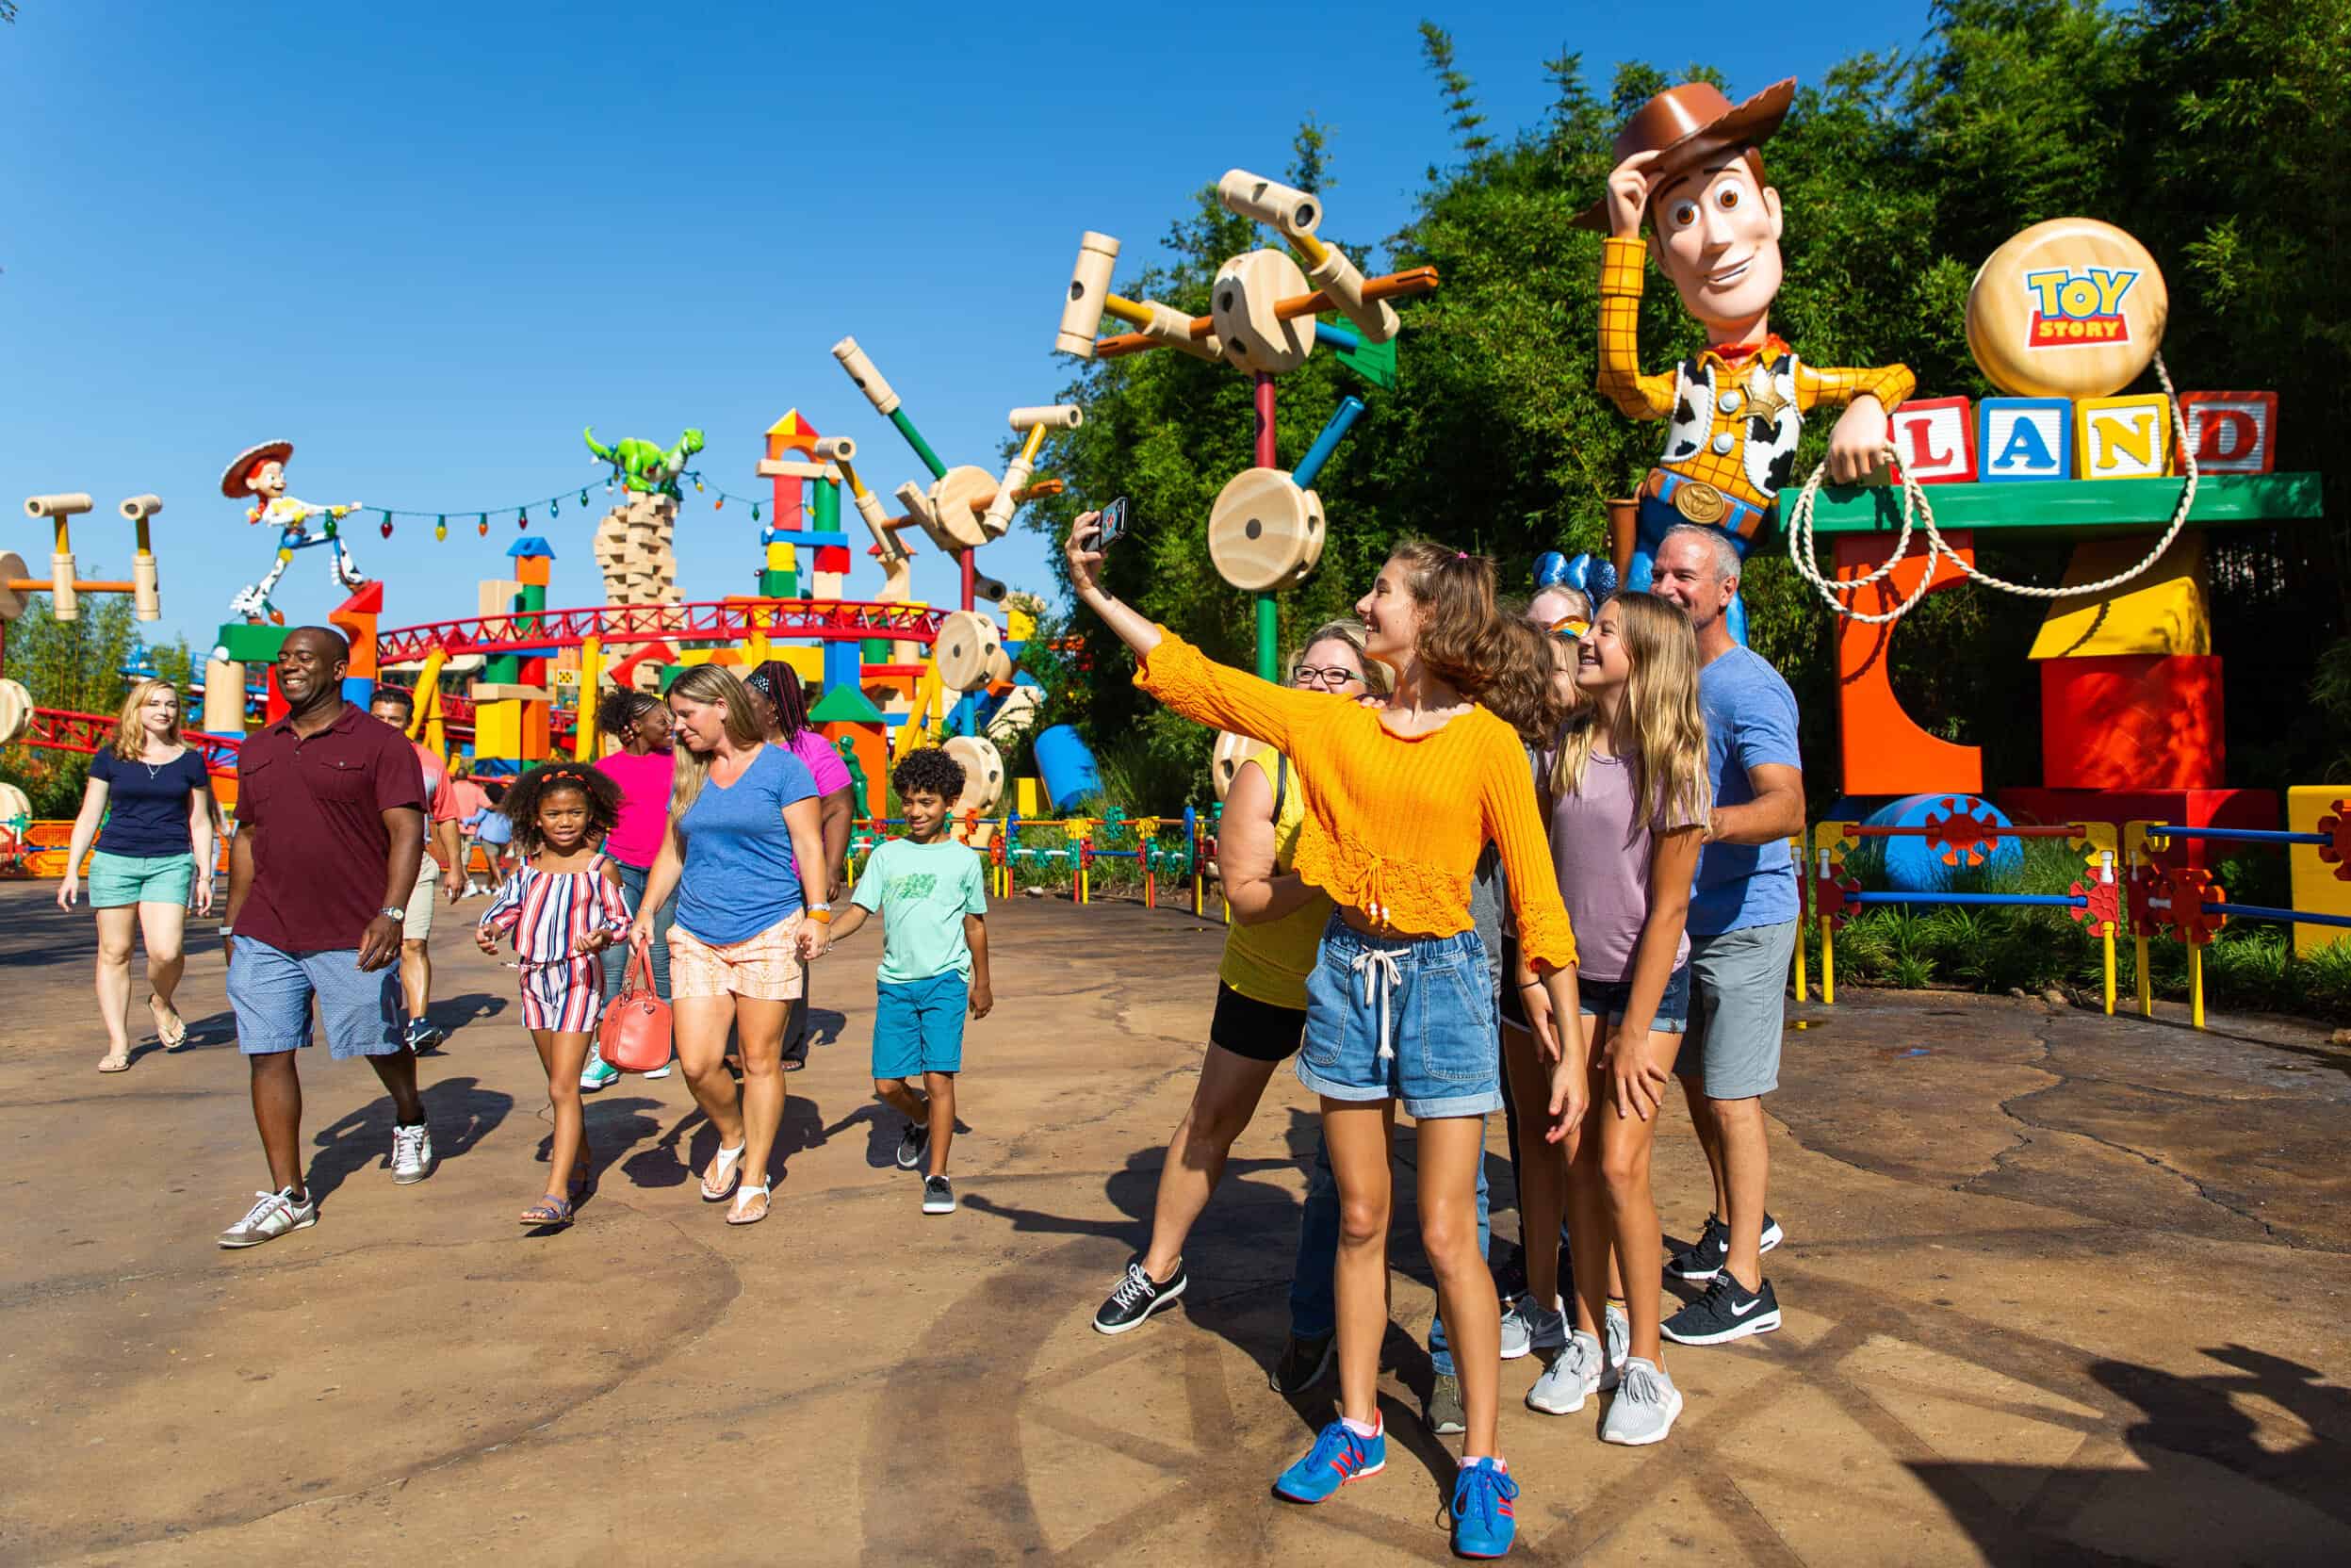 <p>If you’re planning a trip to Disney, it’s essential to think about when you can avoid the crowds and the summer heat. Well, new research reveals the three best days to visit based on a crowds-to-weather score. </p> <p><a href="https://planneratheart.com/best-time-to-go-to-disney-world/">The 3 Best Days to Visit Walt Disney World Revealed</a></p>